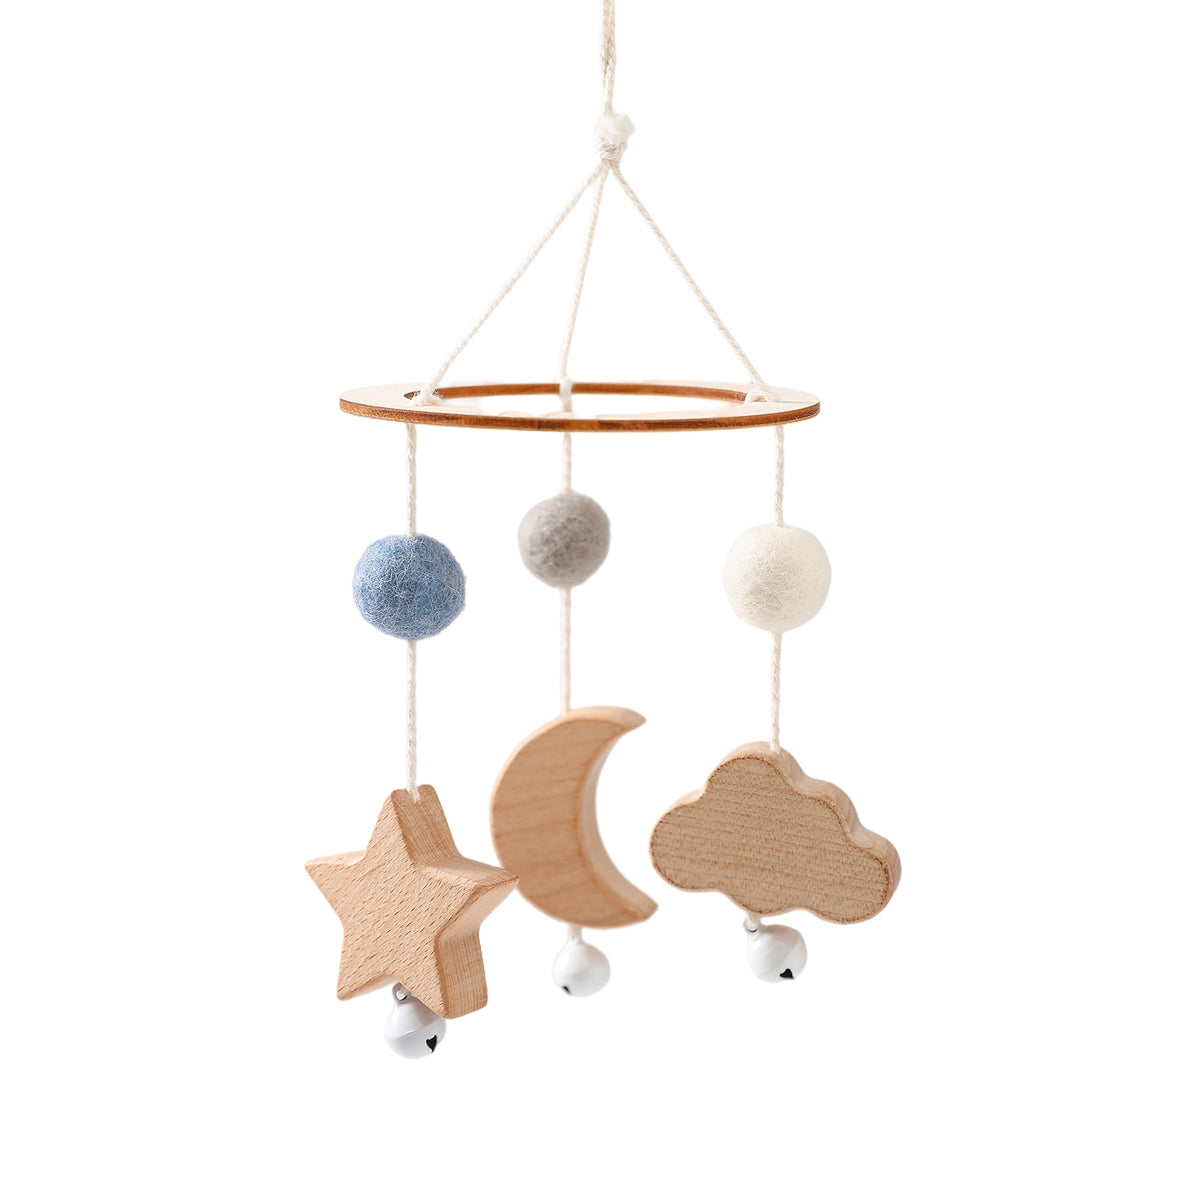 Happinest.mu - Handmade baby mobile elephant theme 🐘 Price is 1750 MUR  with basic music box. Music box gives magic to the mobile as it also rotate  the mobile. The basic version